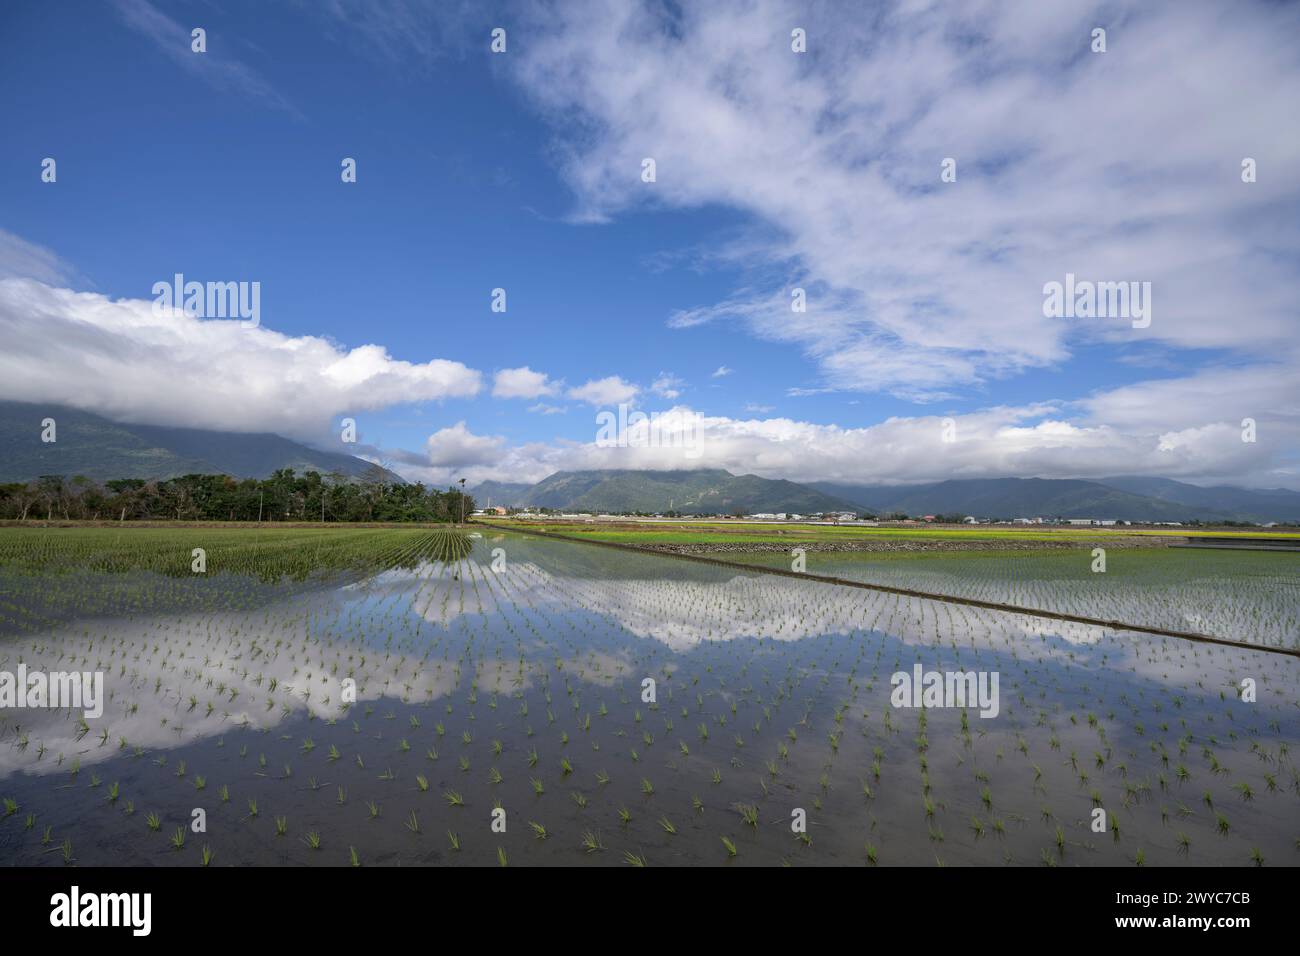 A serene landscape of water-filled rice paddies reflecting sky with distant mountains and clouds Stock Photo